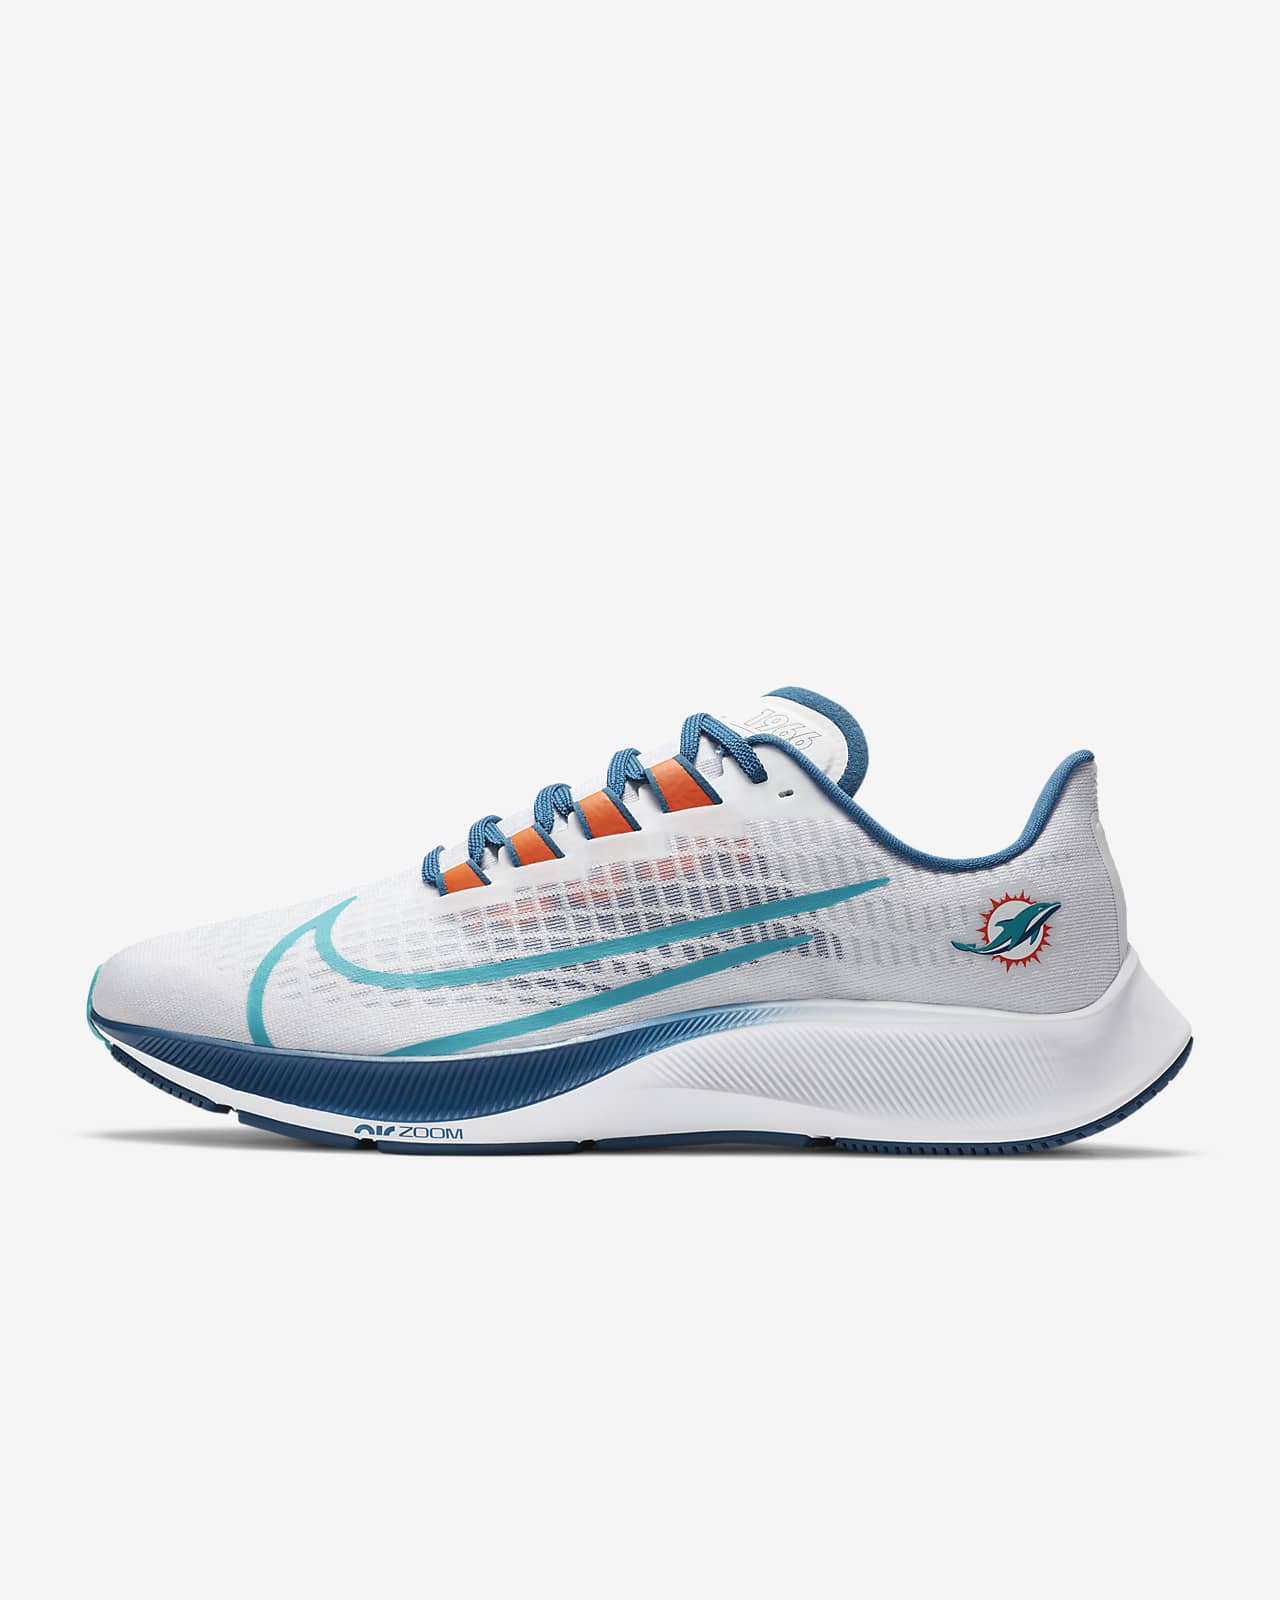 miami dolphins nike shoes